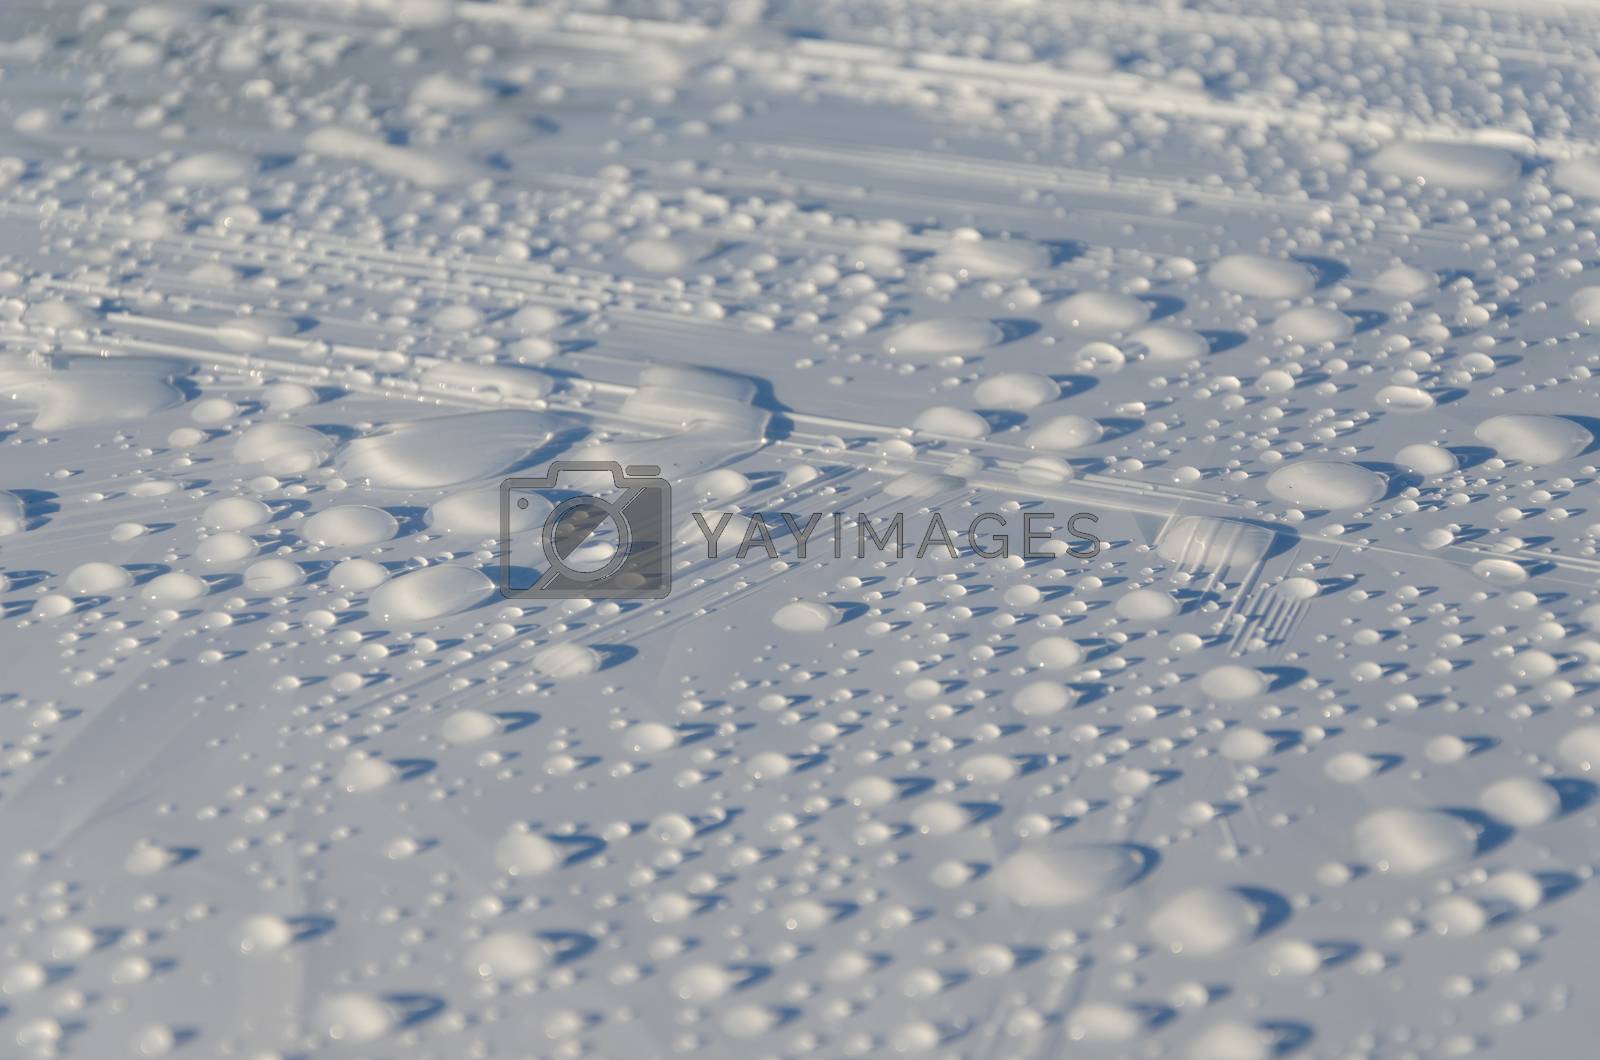 Royalty free image of rain drops glisten on white surface background  by sauletas